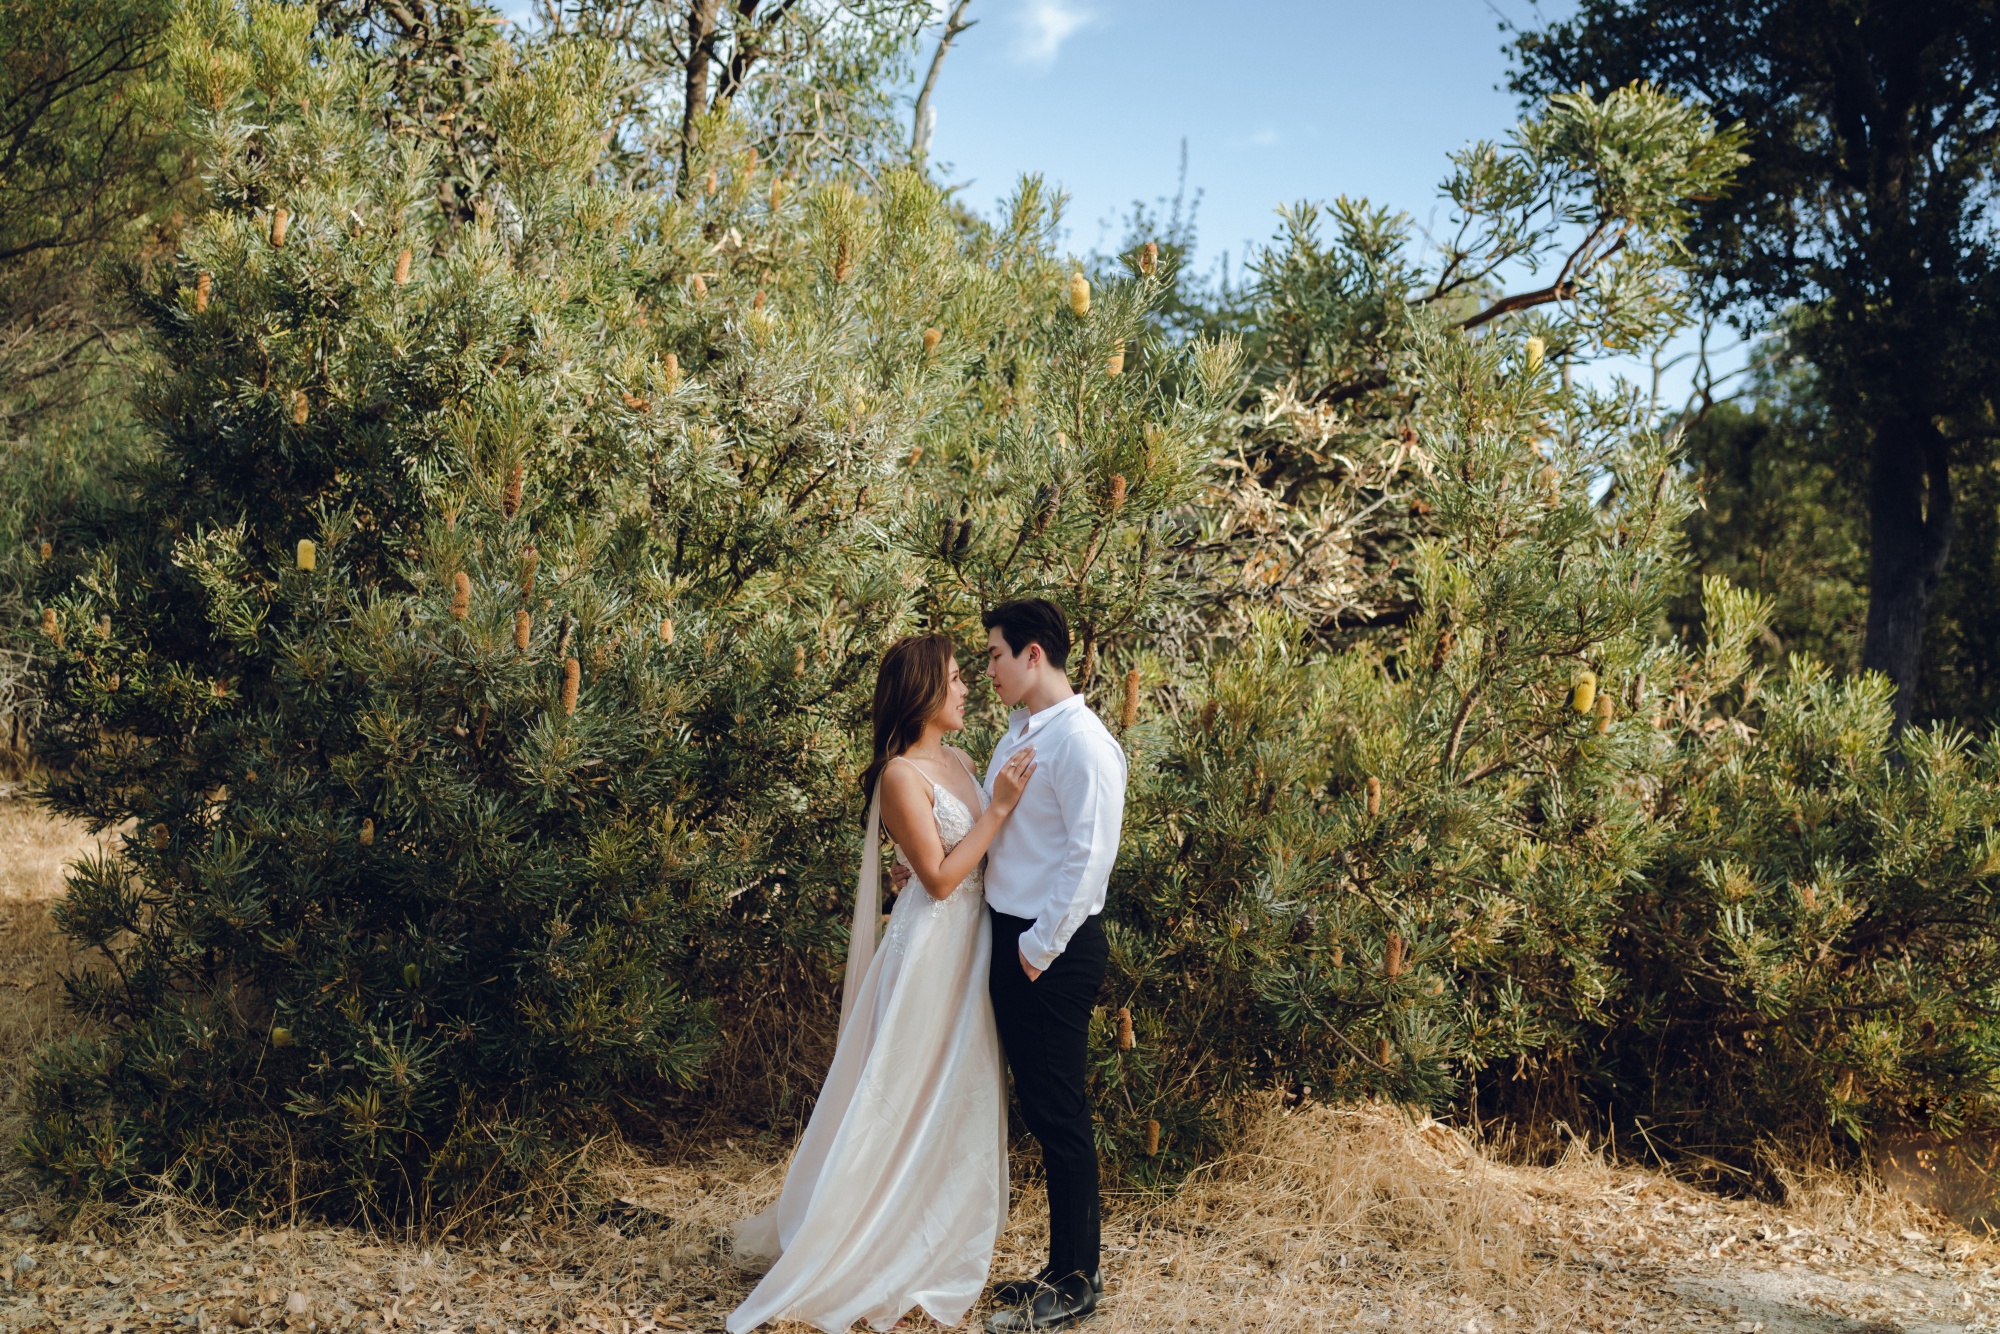 Capturing Forever in Perth: Jasmine & Kamui's Pre-Wedding Story by Jimmy on OneThreeOneFour 10